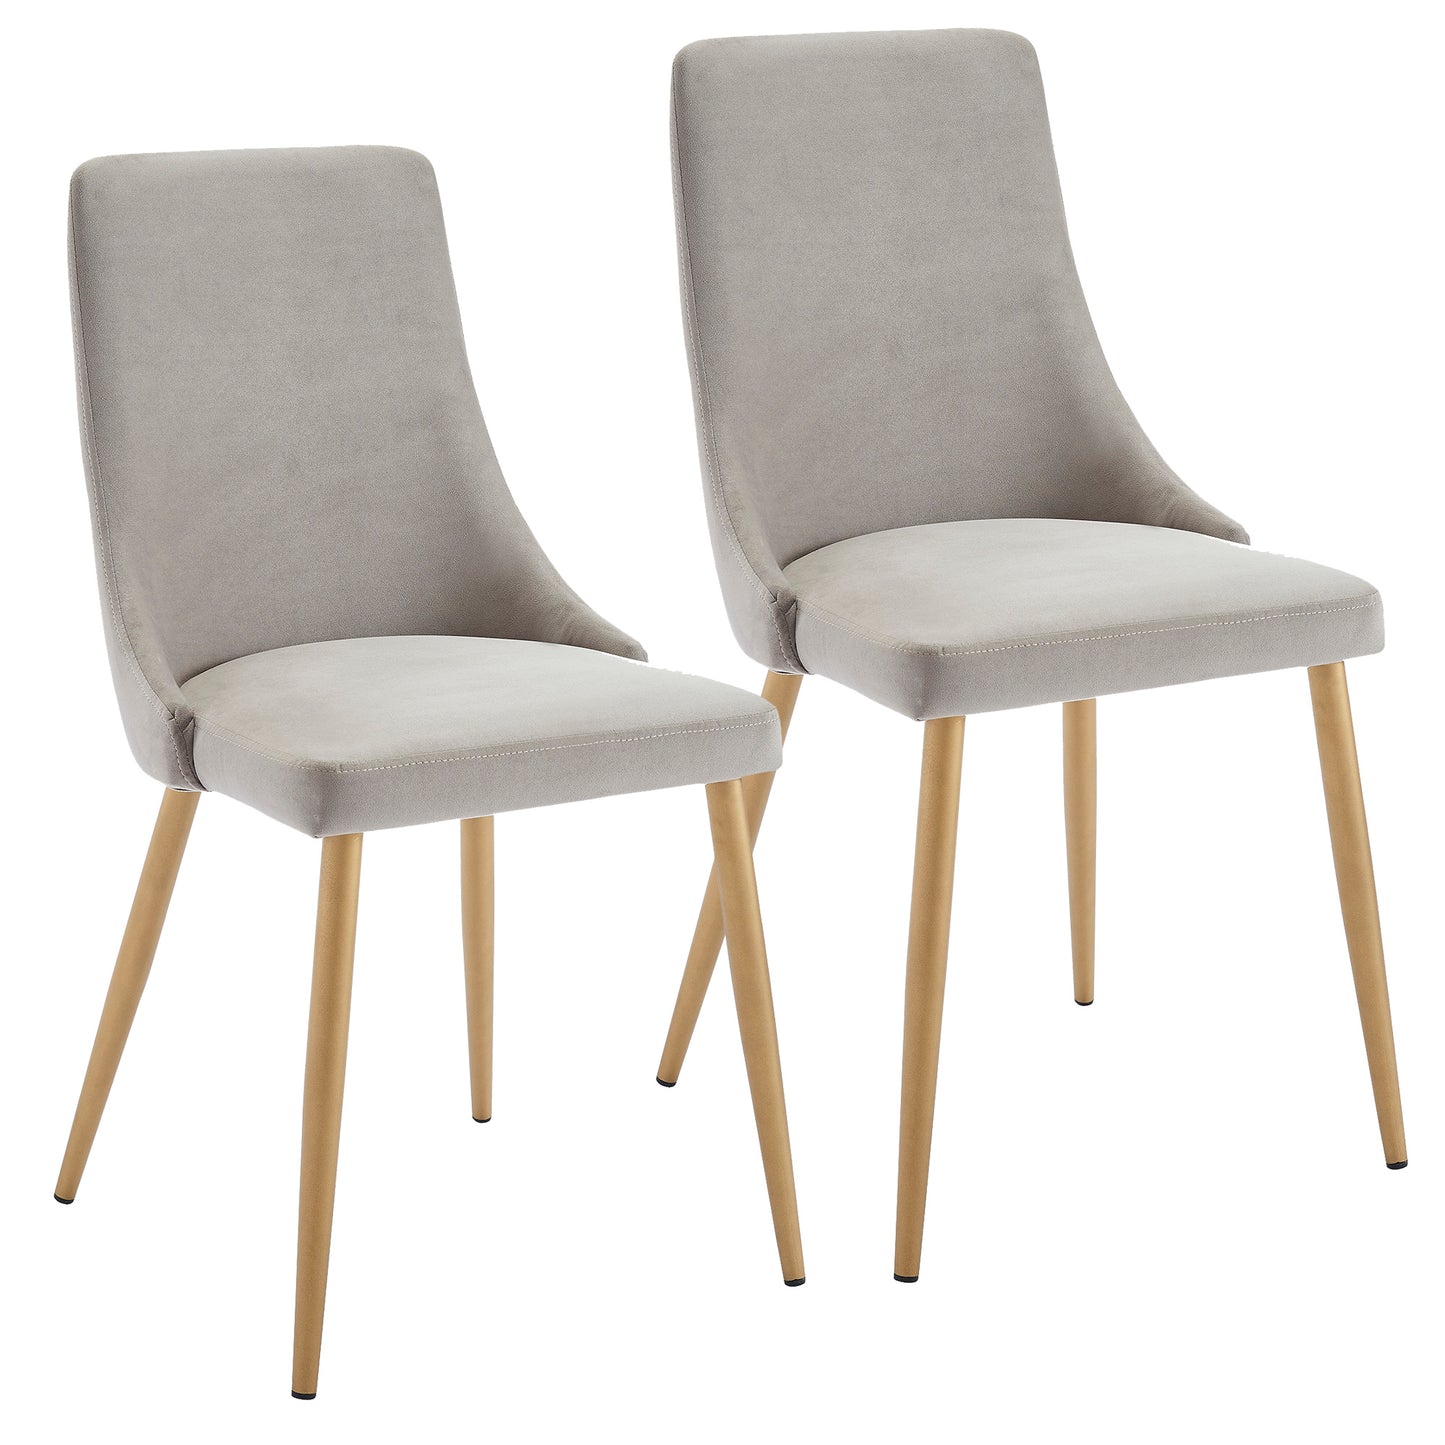 (CARMILLA GREY- 2 PACK)- FABRIC- DINING CHAIRS- SUPPLIER CLEARANCE